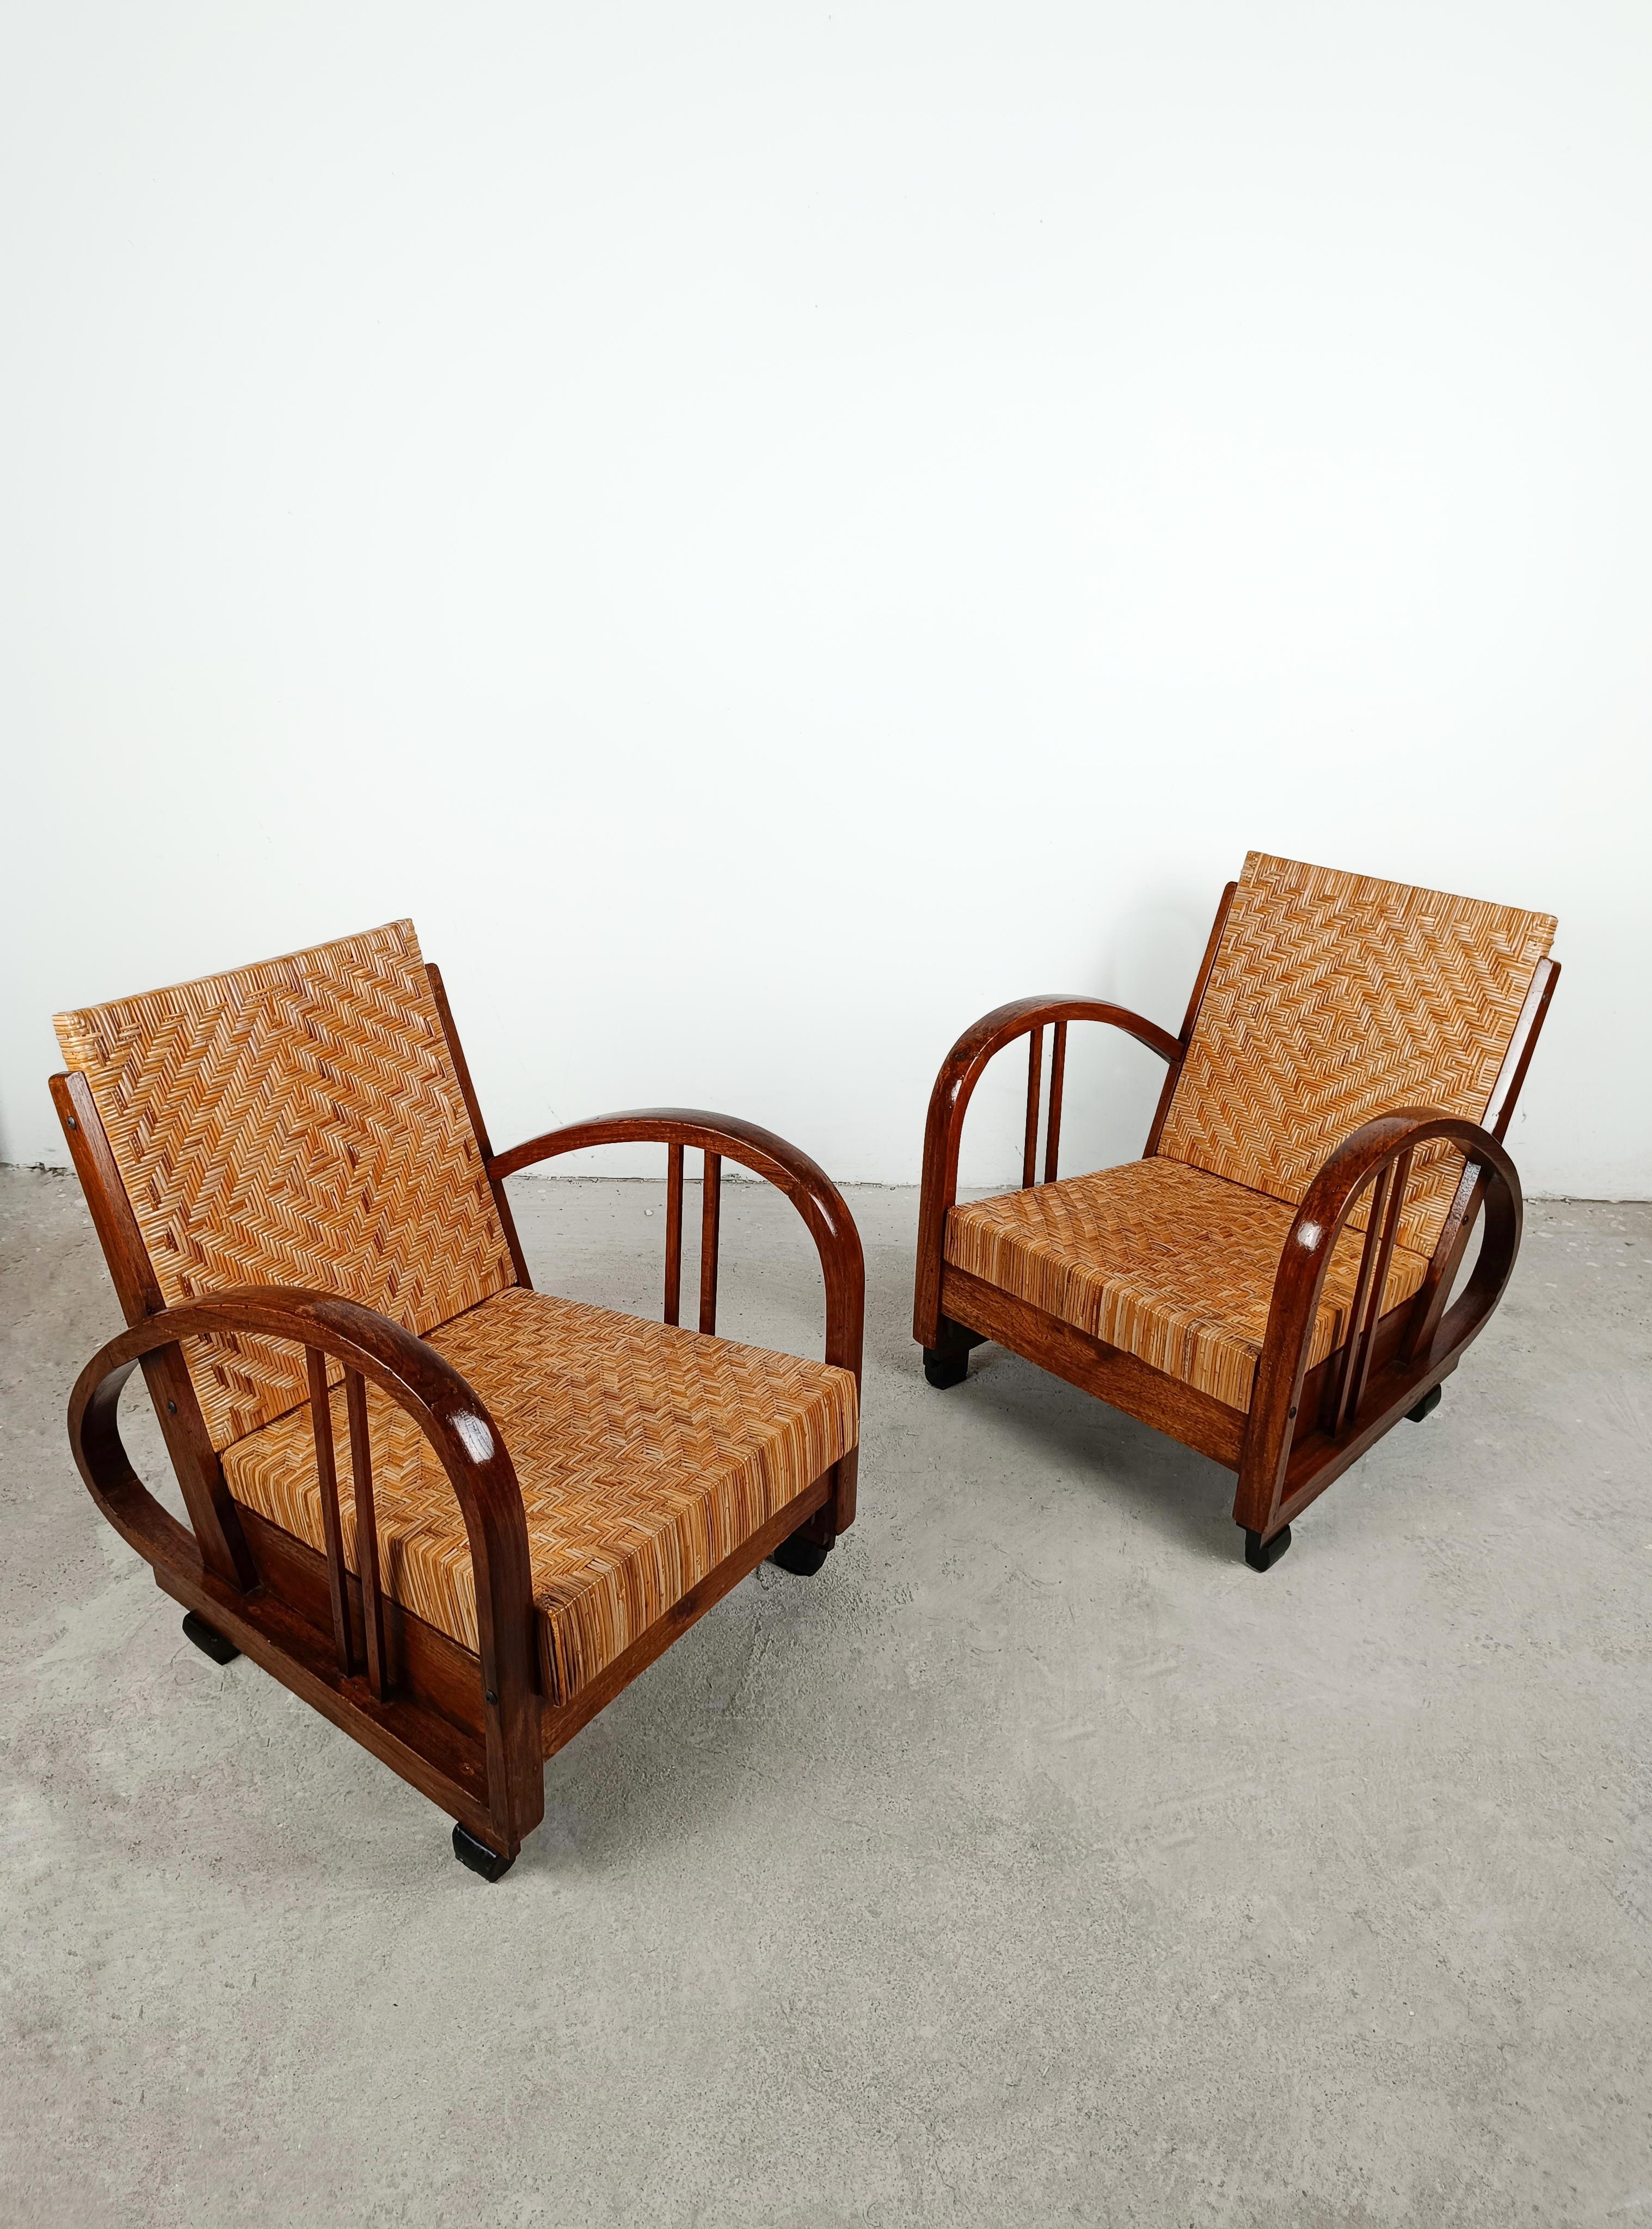 20th Century Pair of Art Deco Lounge Chairs in Teak and Cane in the Style of Francis Jourdain For Sale